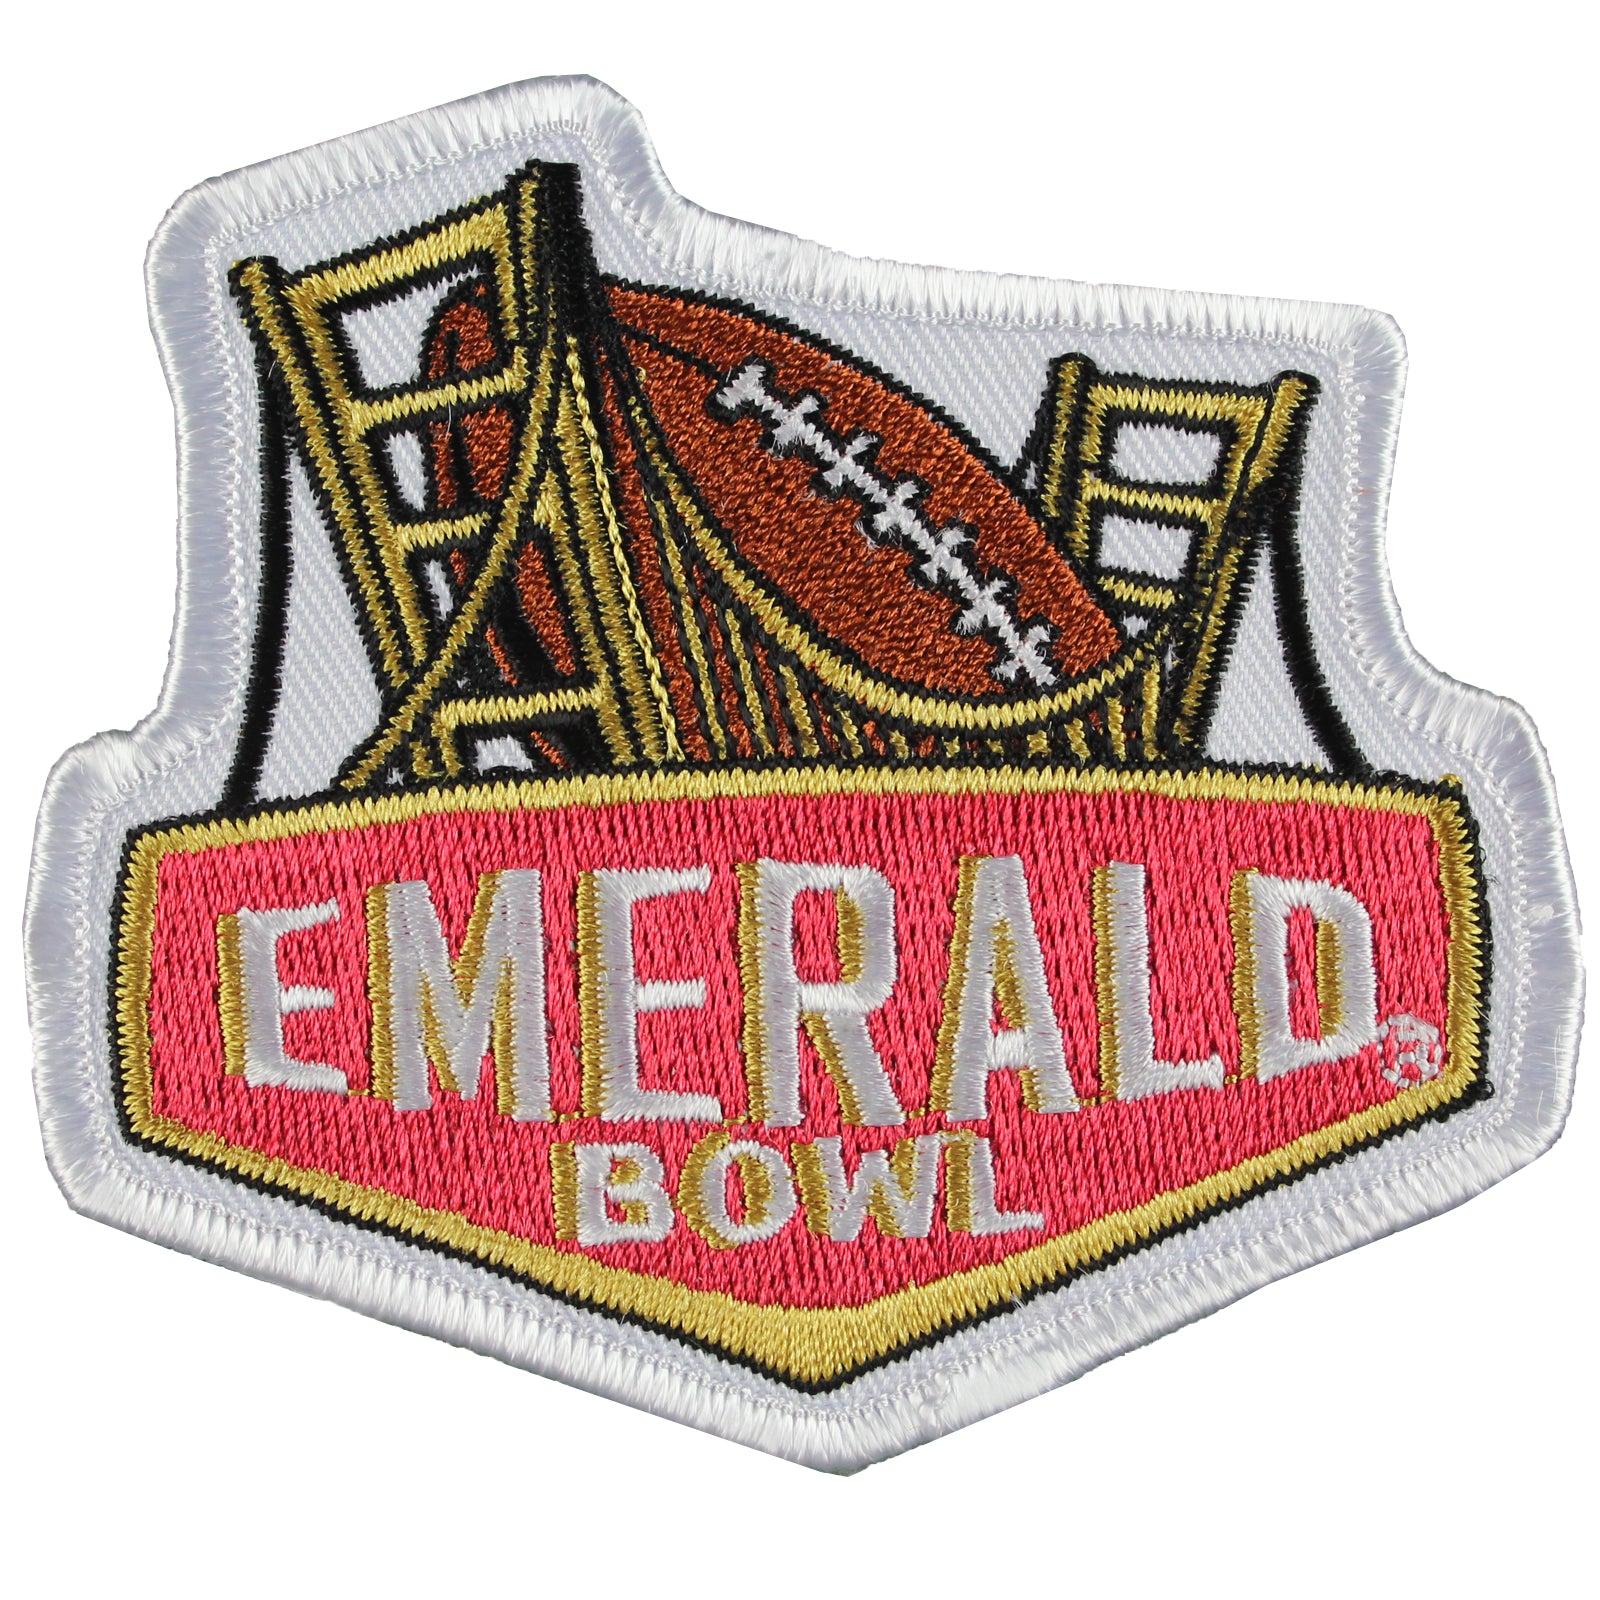 Emerald Bowl Game Patch (2004-2009) 